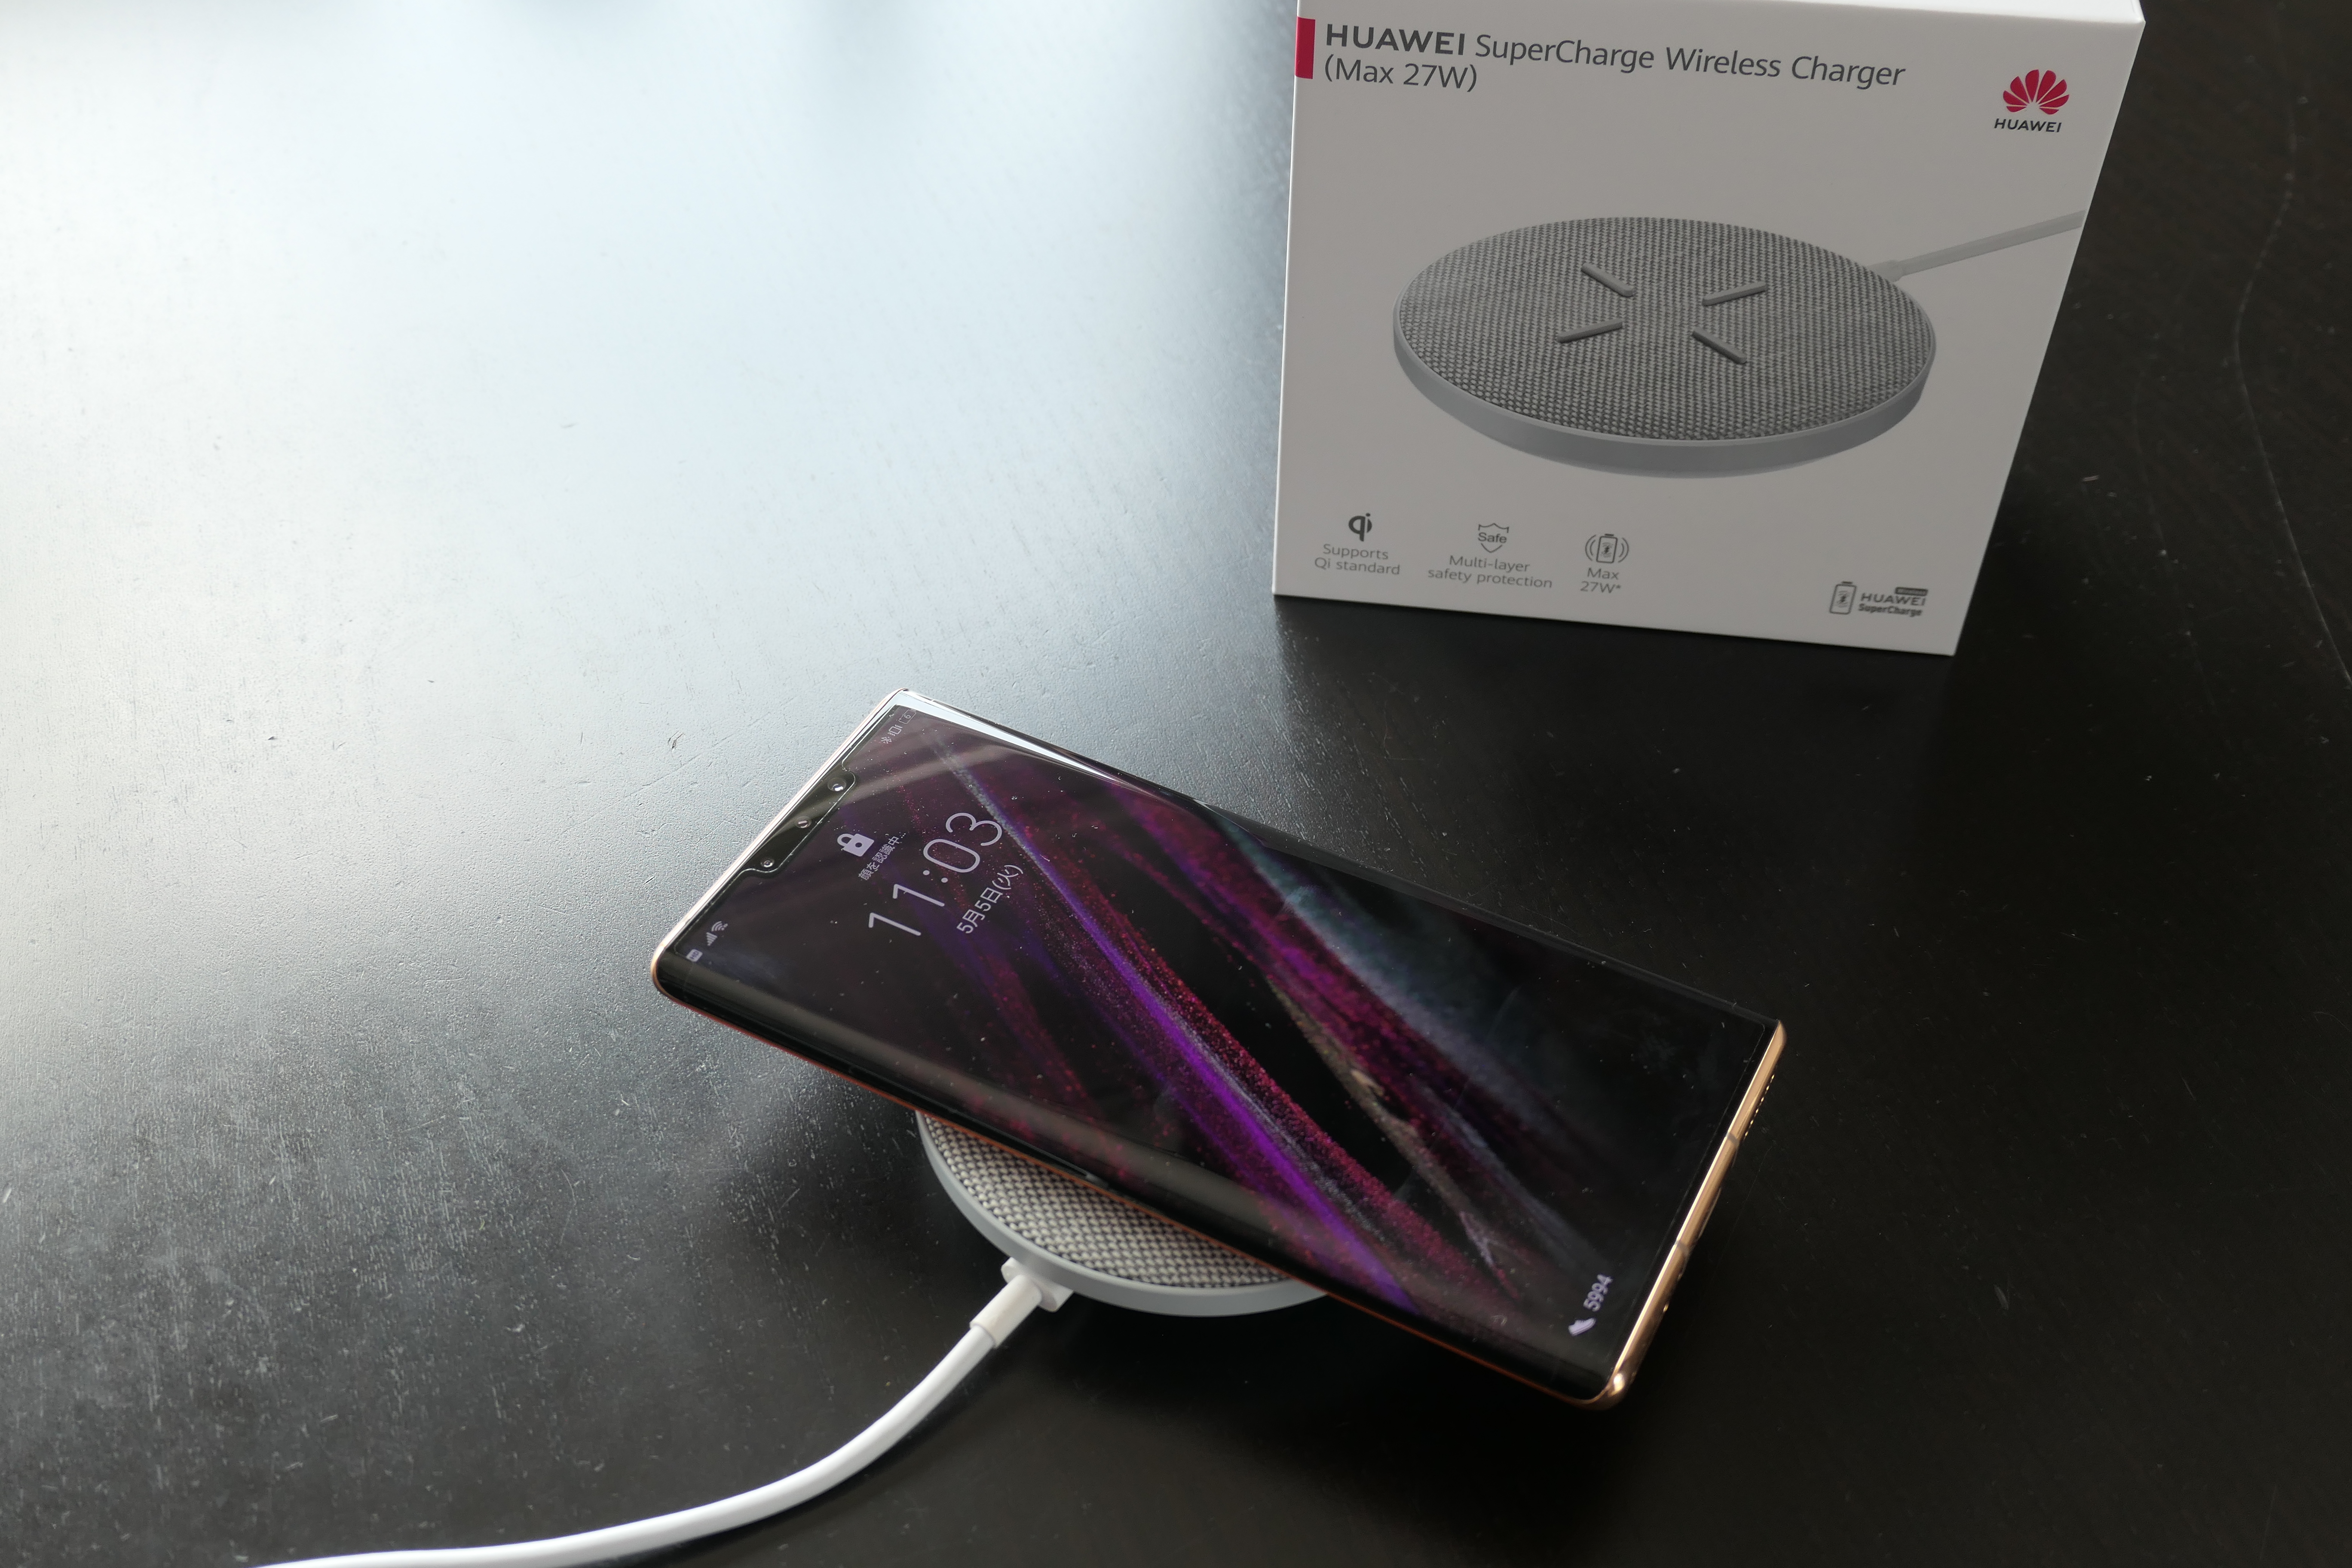 HUAWEI SuperCharge ワイヤレス充電器 最大27W